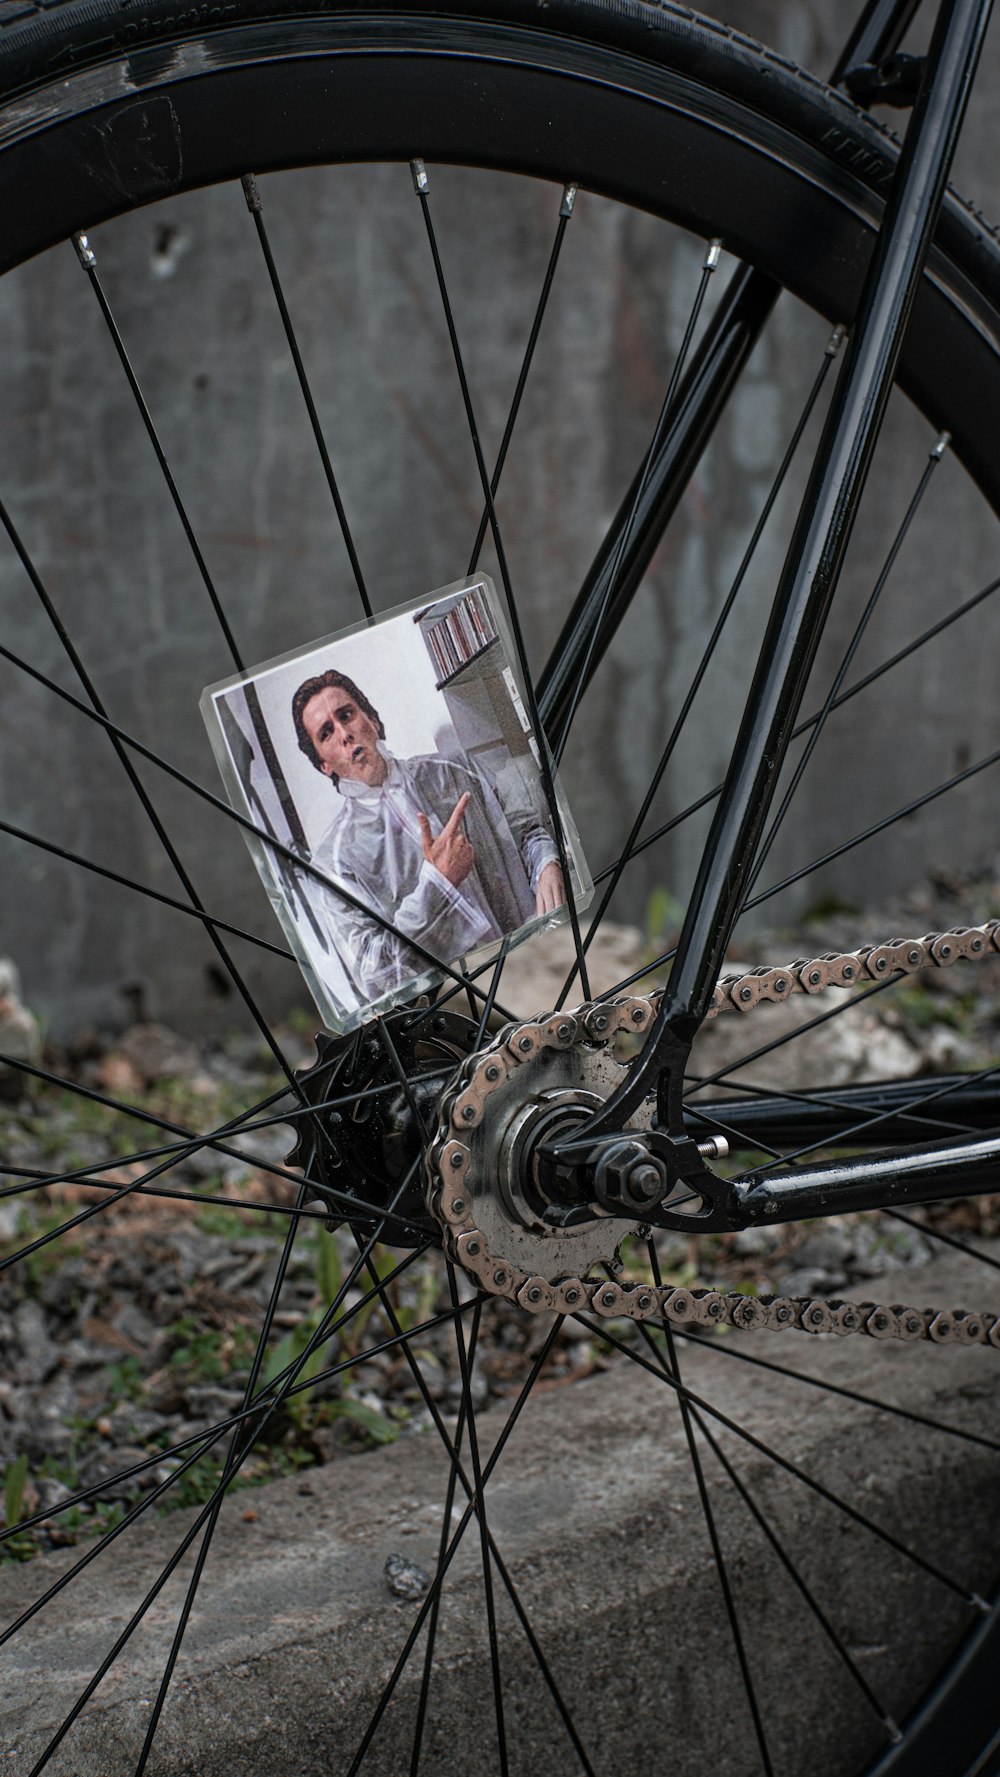 a bicycle wheel with a picture of a man on it